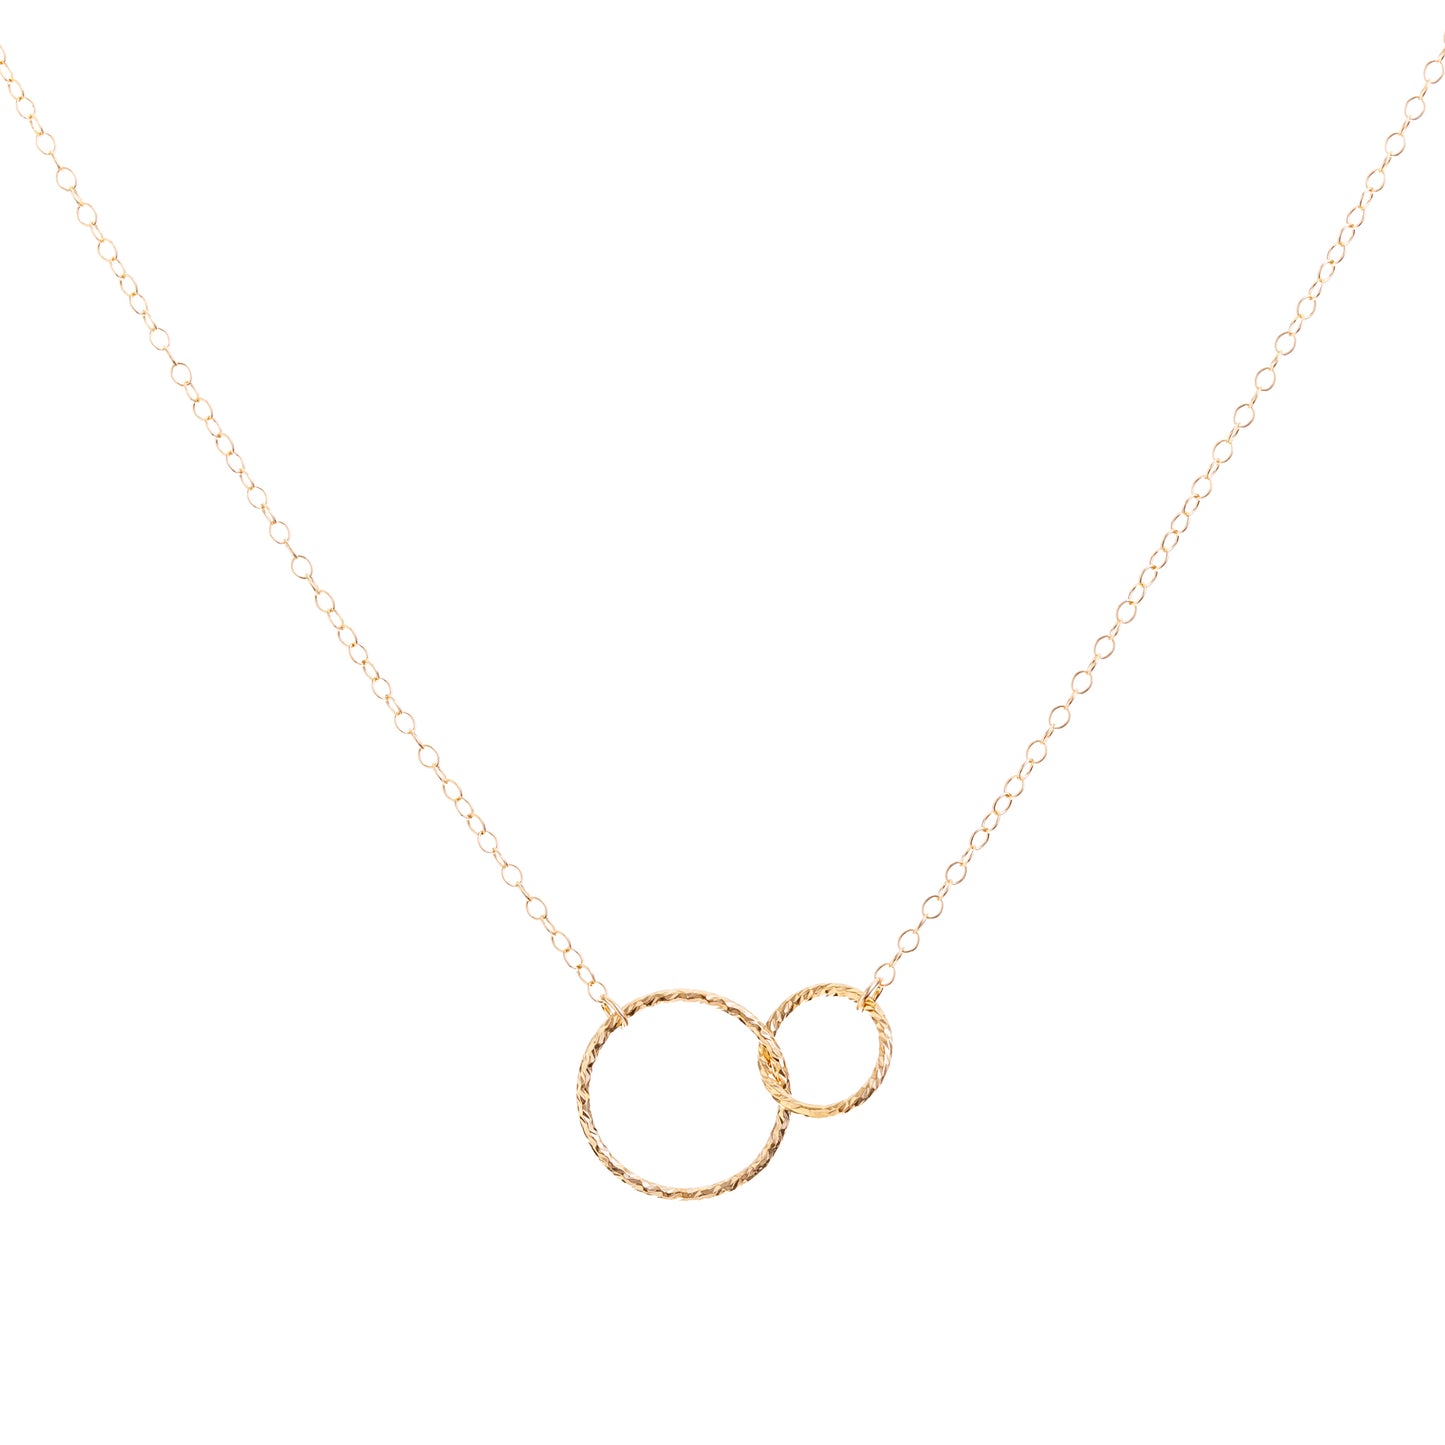 Minimal Gold Linked Circles Necklace